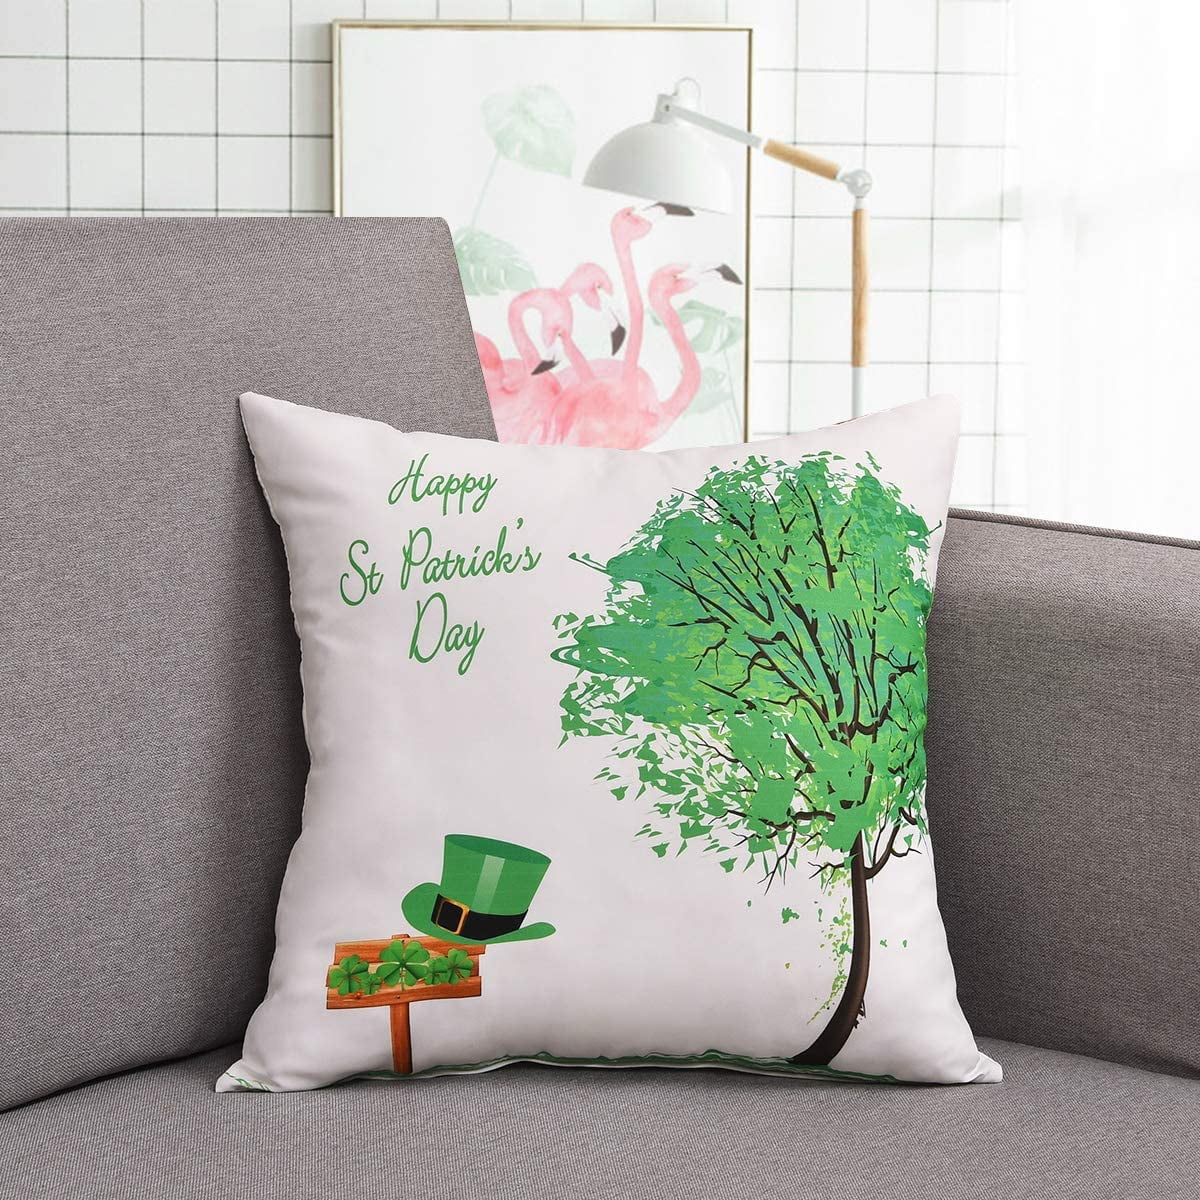 Patrick Day Green Throw Pillow Cushion Cover Set of 4 18 x 18 inches 45 x 45 cm Phantoscope Happy St